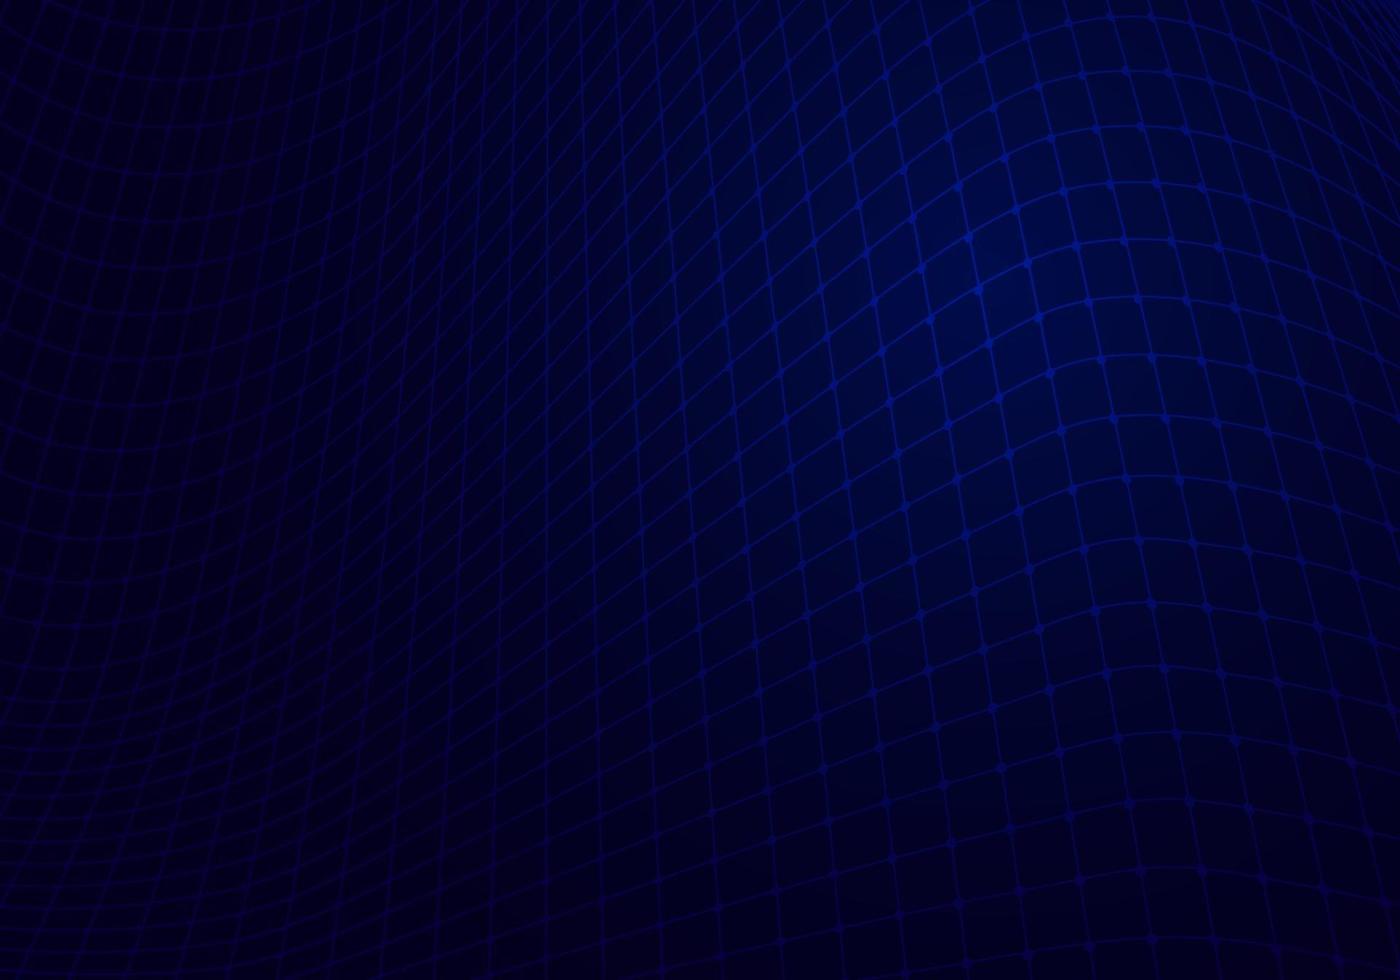 Abstract blue mesh grid network on dark background technology digital concept vector